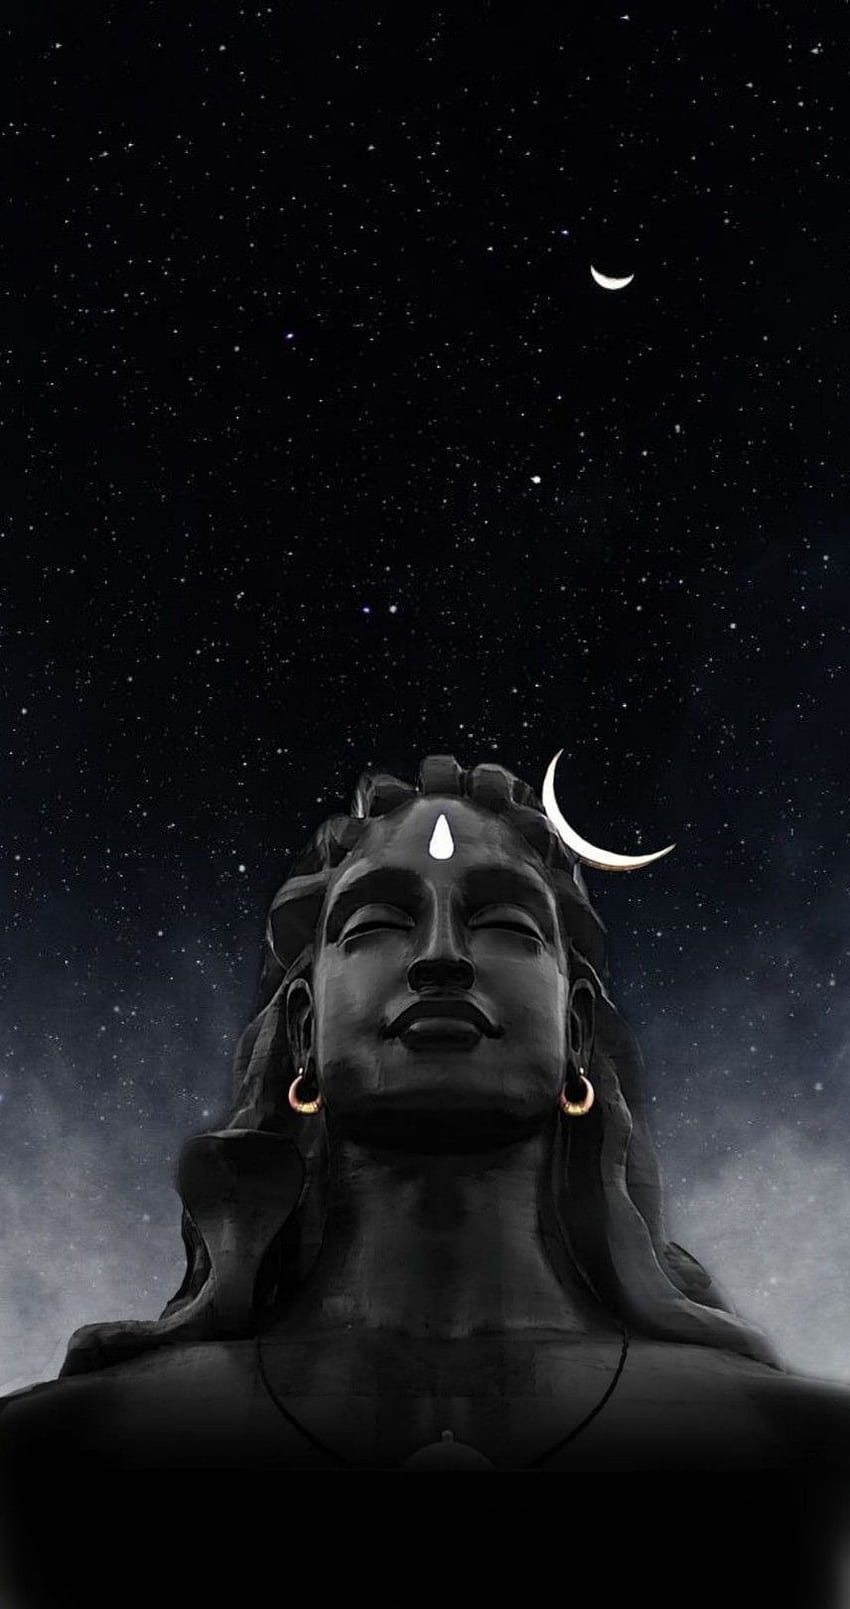 🔥 Lord Shiva Black Wallpapers Photos | MyGodImages